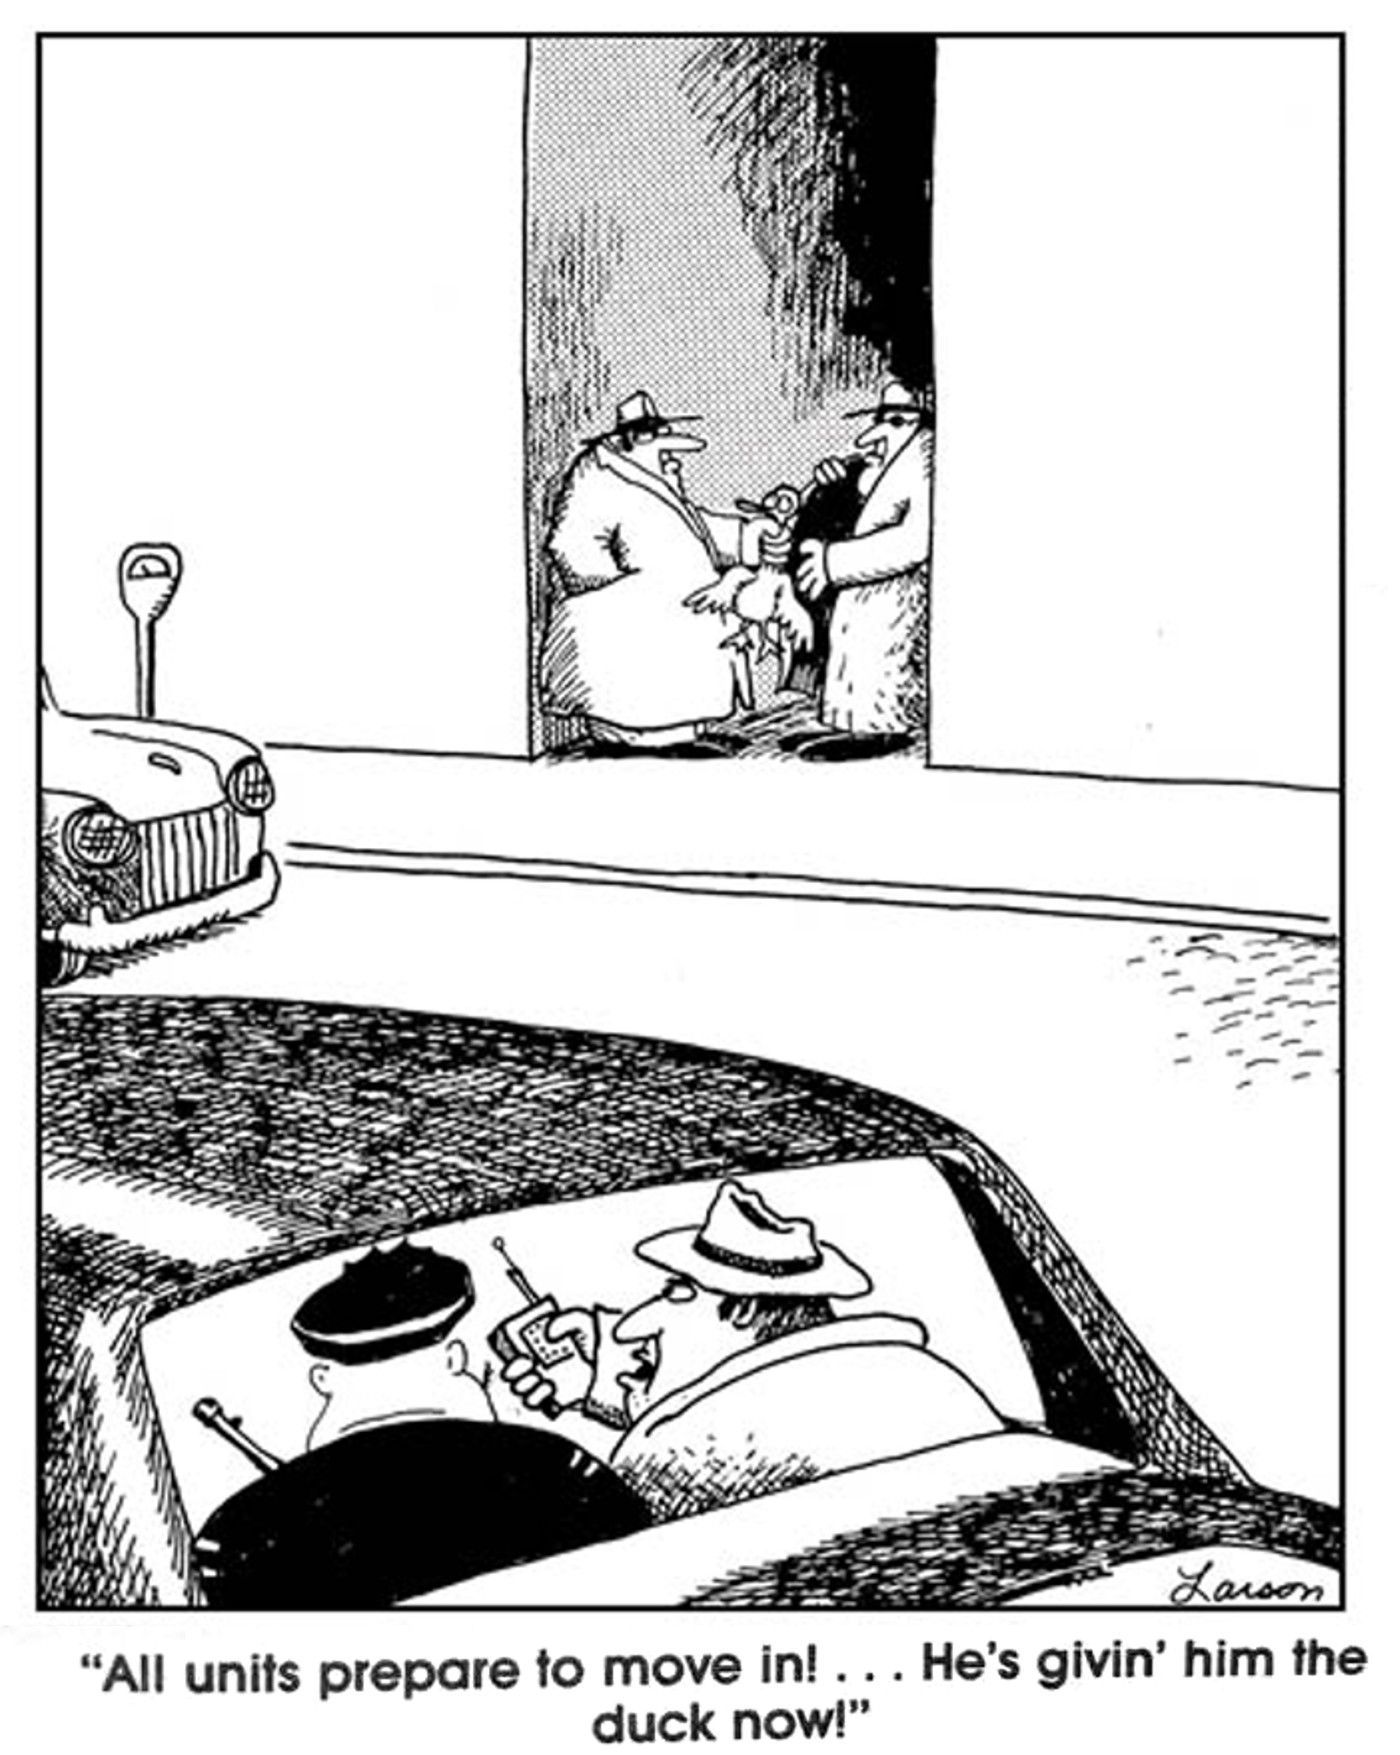 The Far Side, Giving Him The Duck